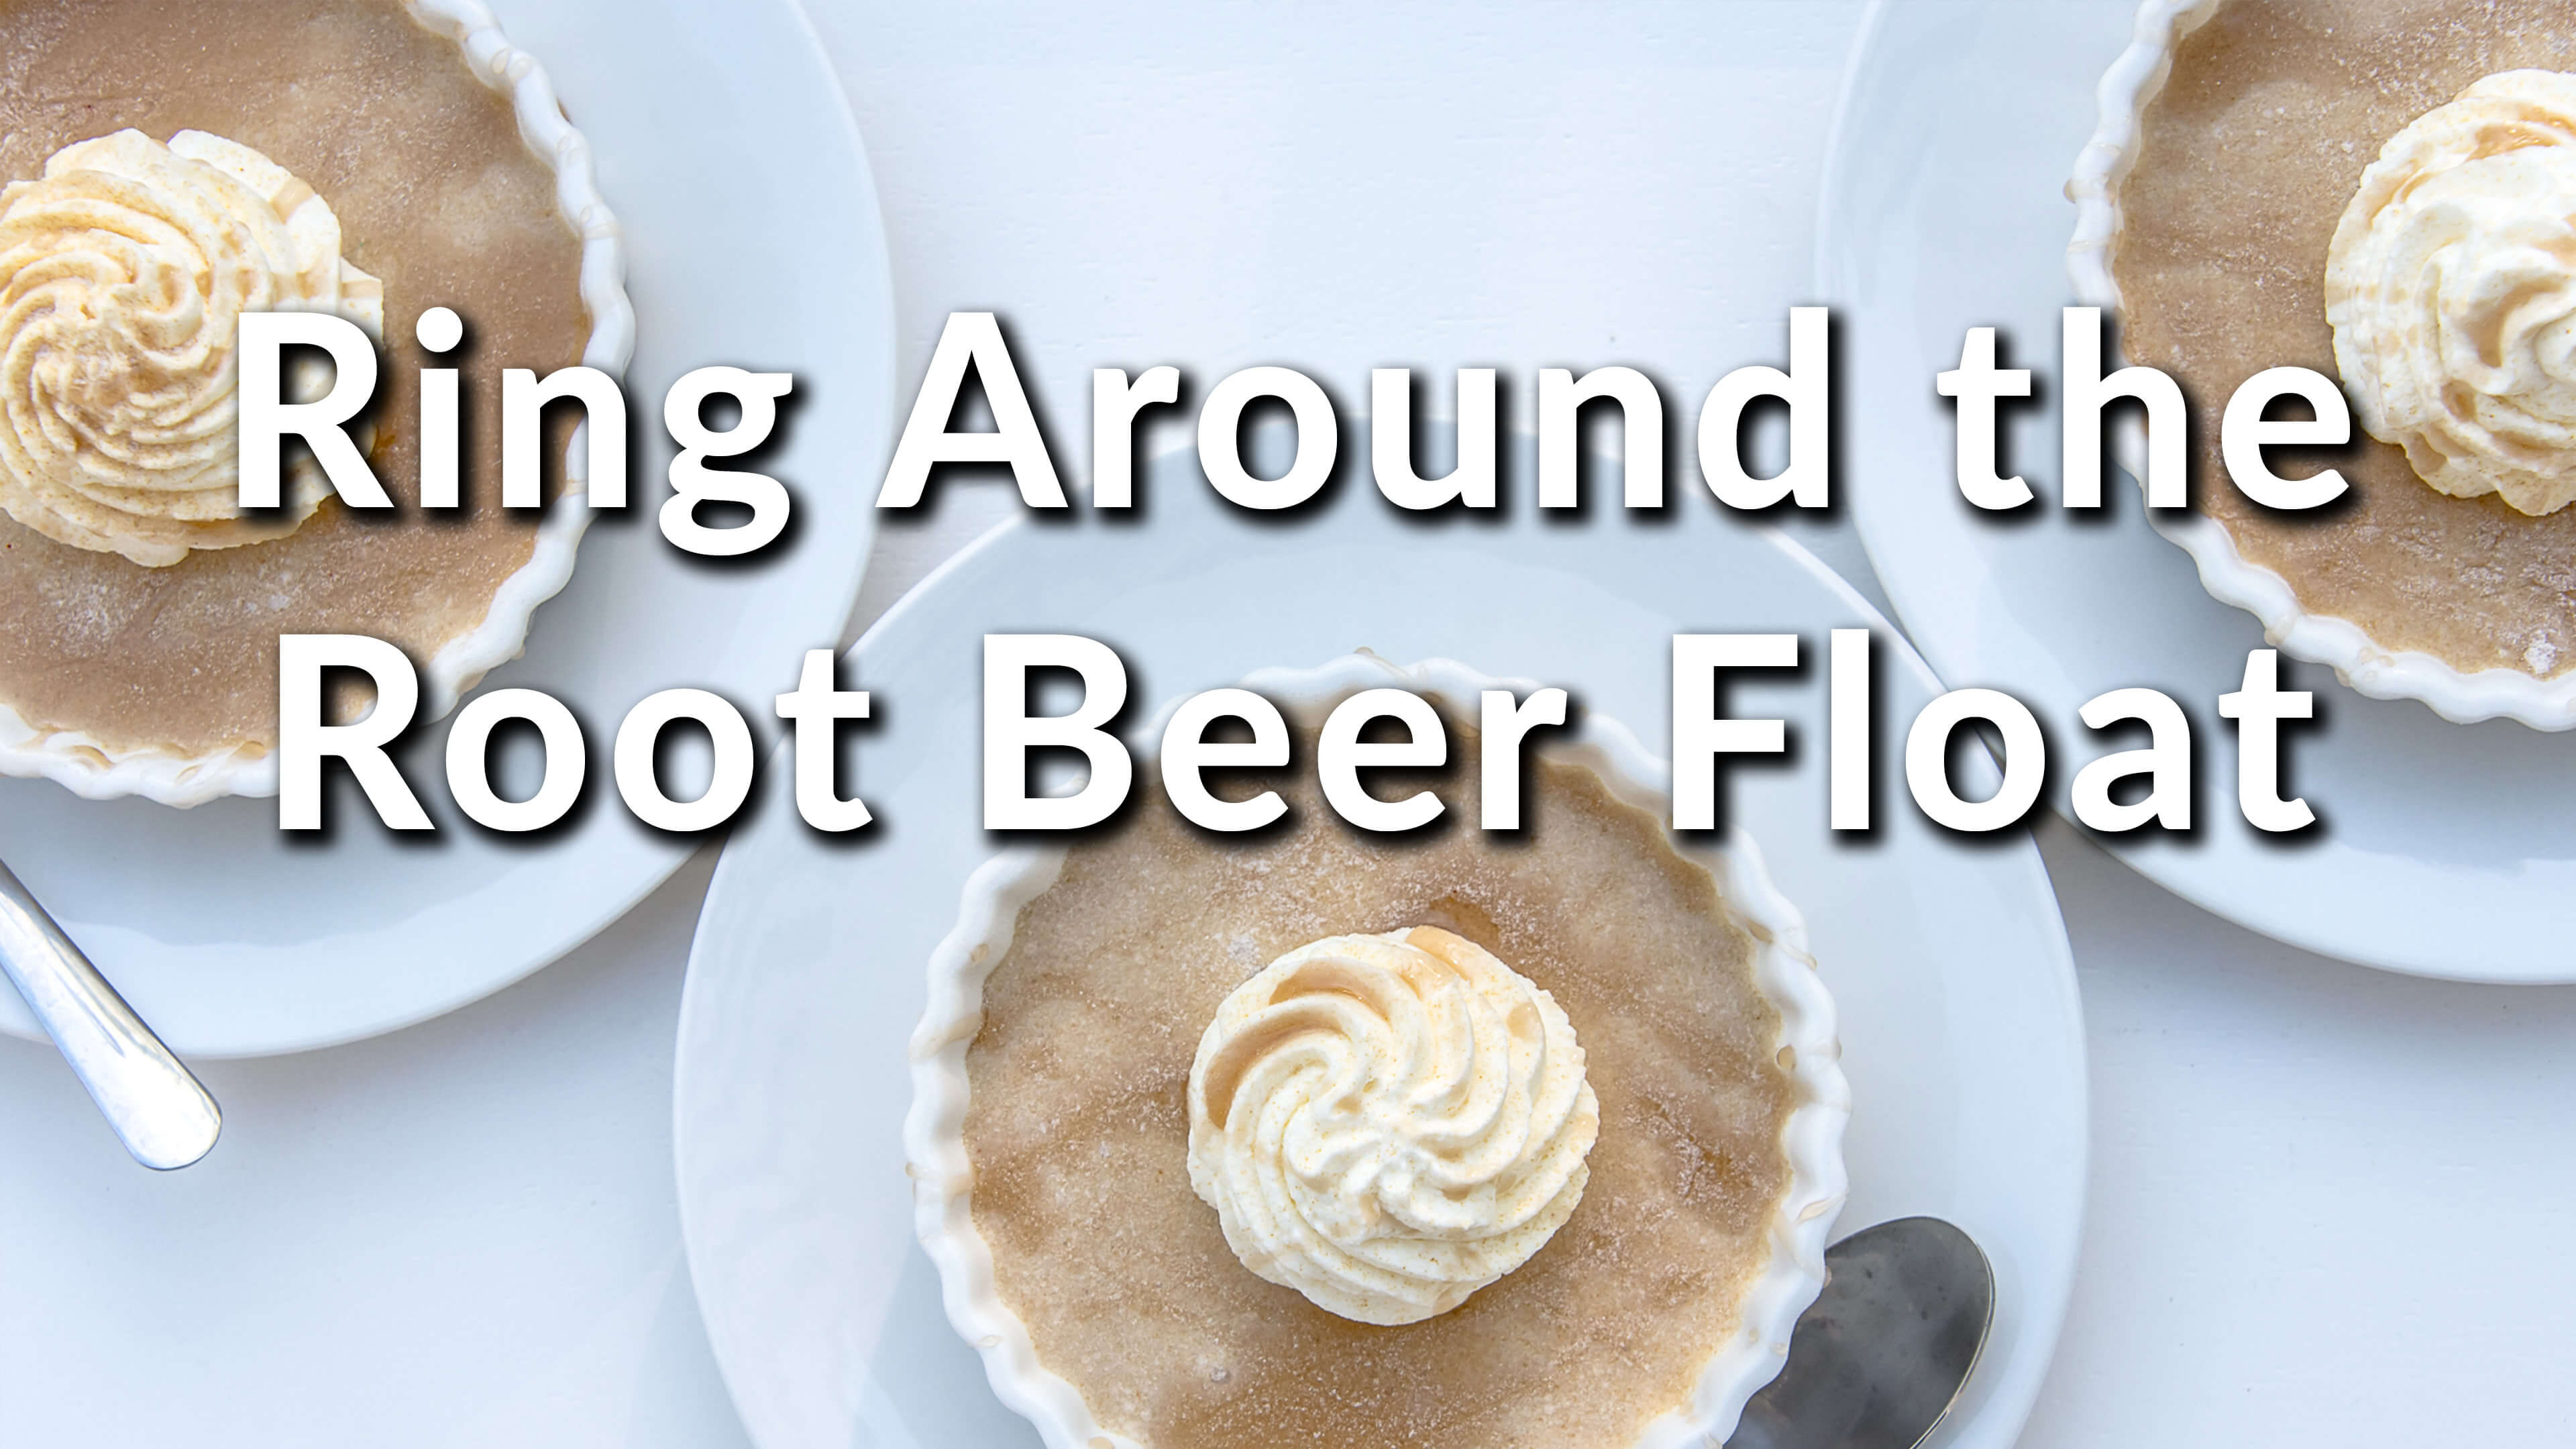 Ring around the Root Beer Float by Chef Taffiny